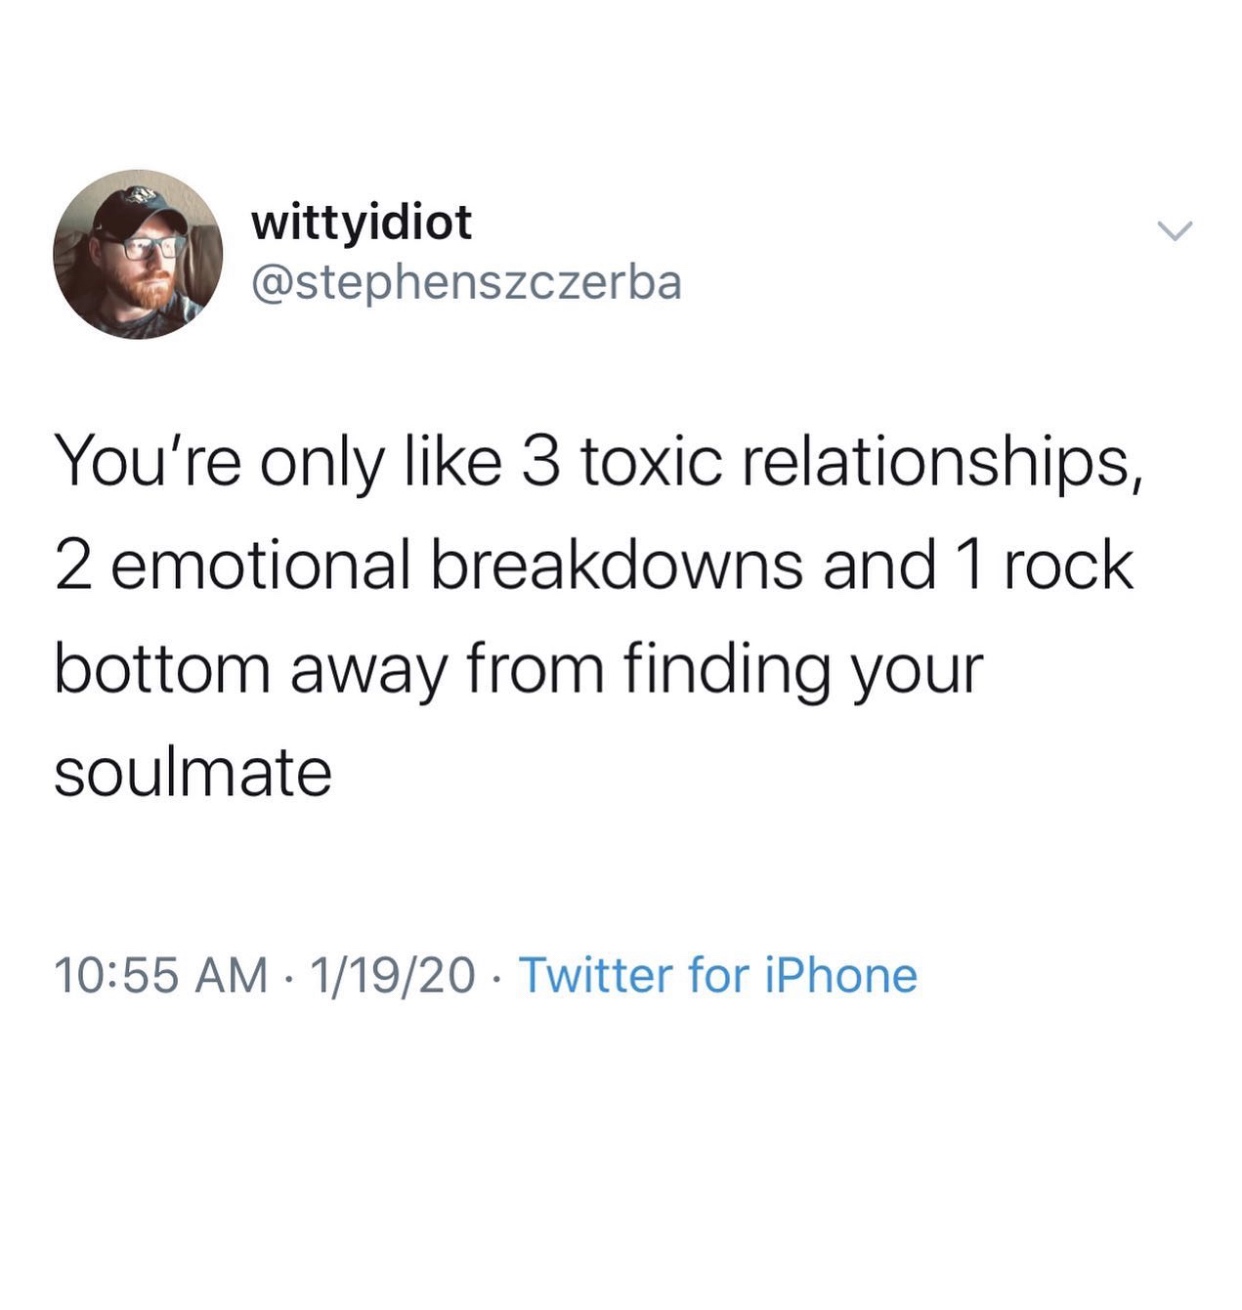 mitochondria in october - wittyidiot You're only 3 toxic relationships, 2 emotional breakdowns and 1 rock bottom away from finding your soulmate 11920 Twitter for iPhone